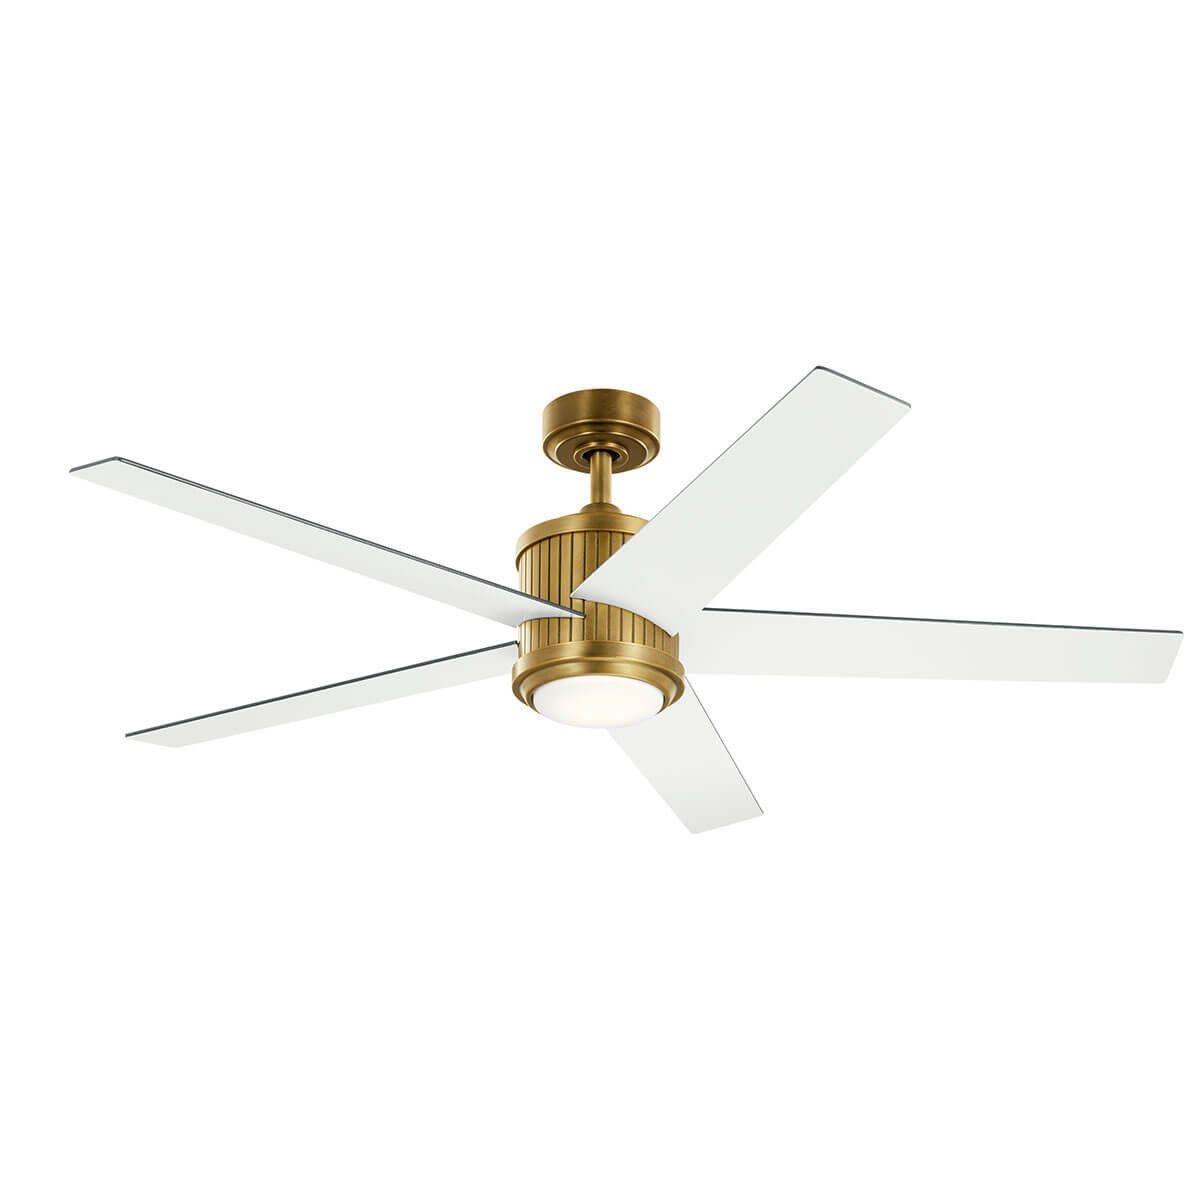 Brahm 56 Inch Modern Propeller Ceiling Fan With Light And Remote